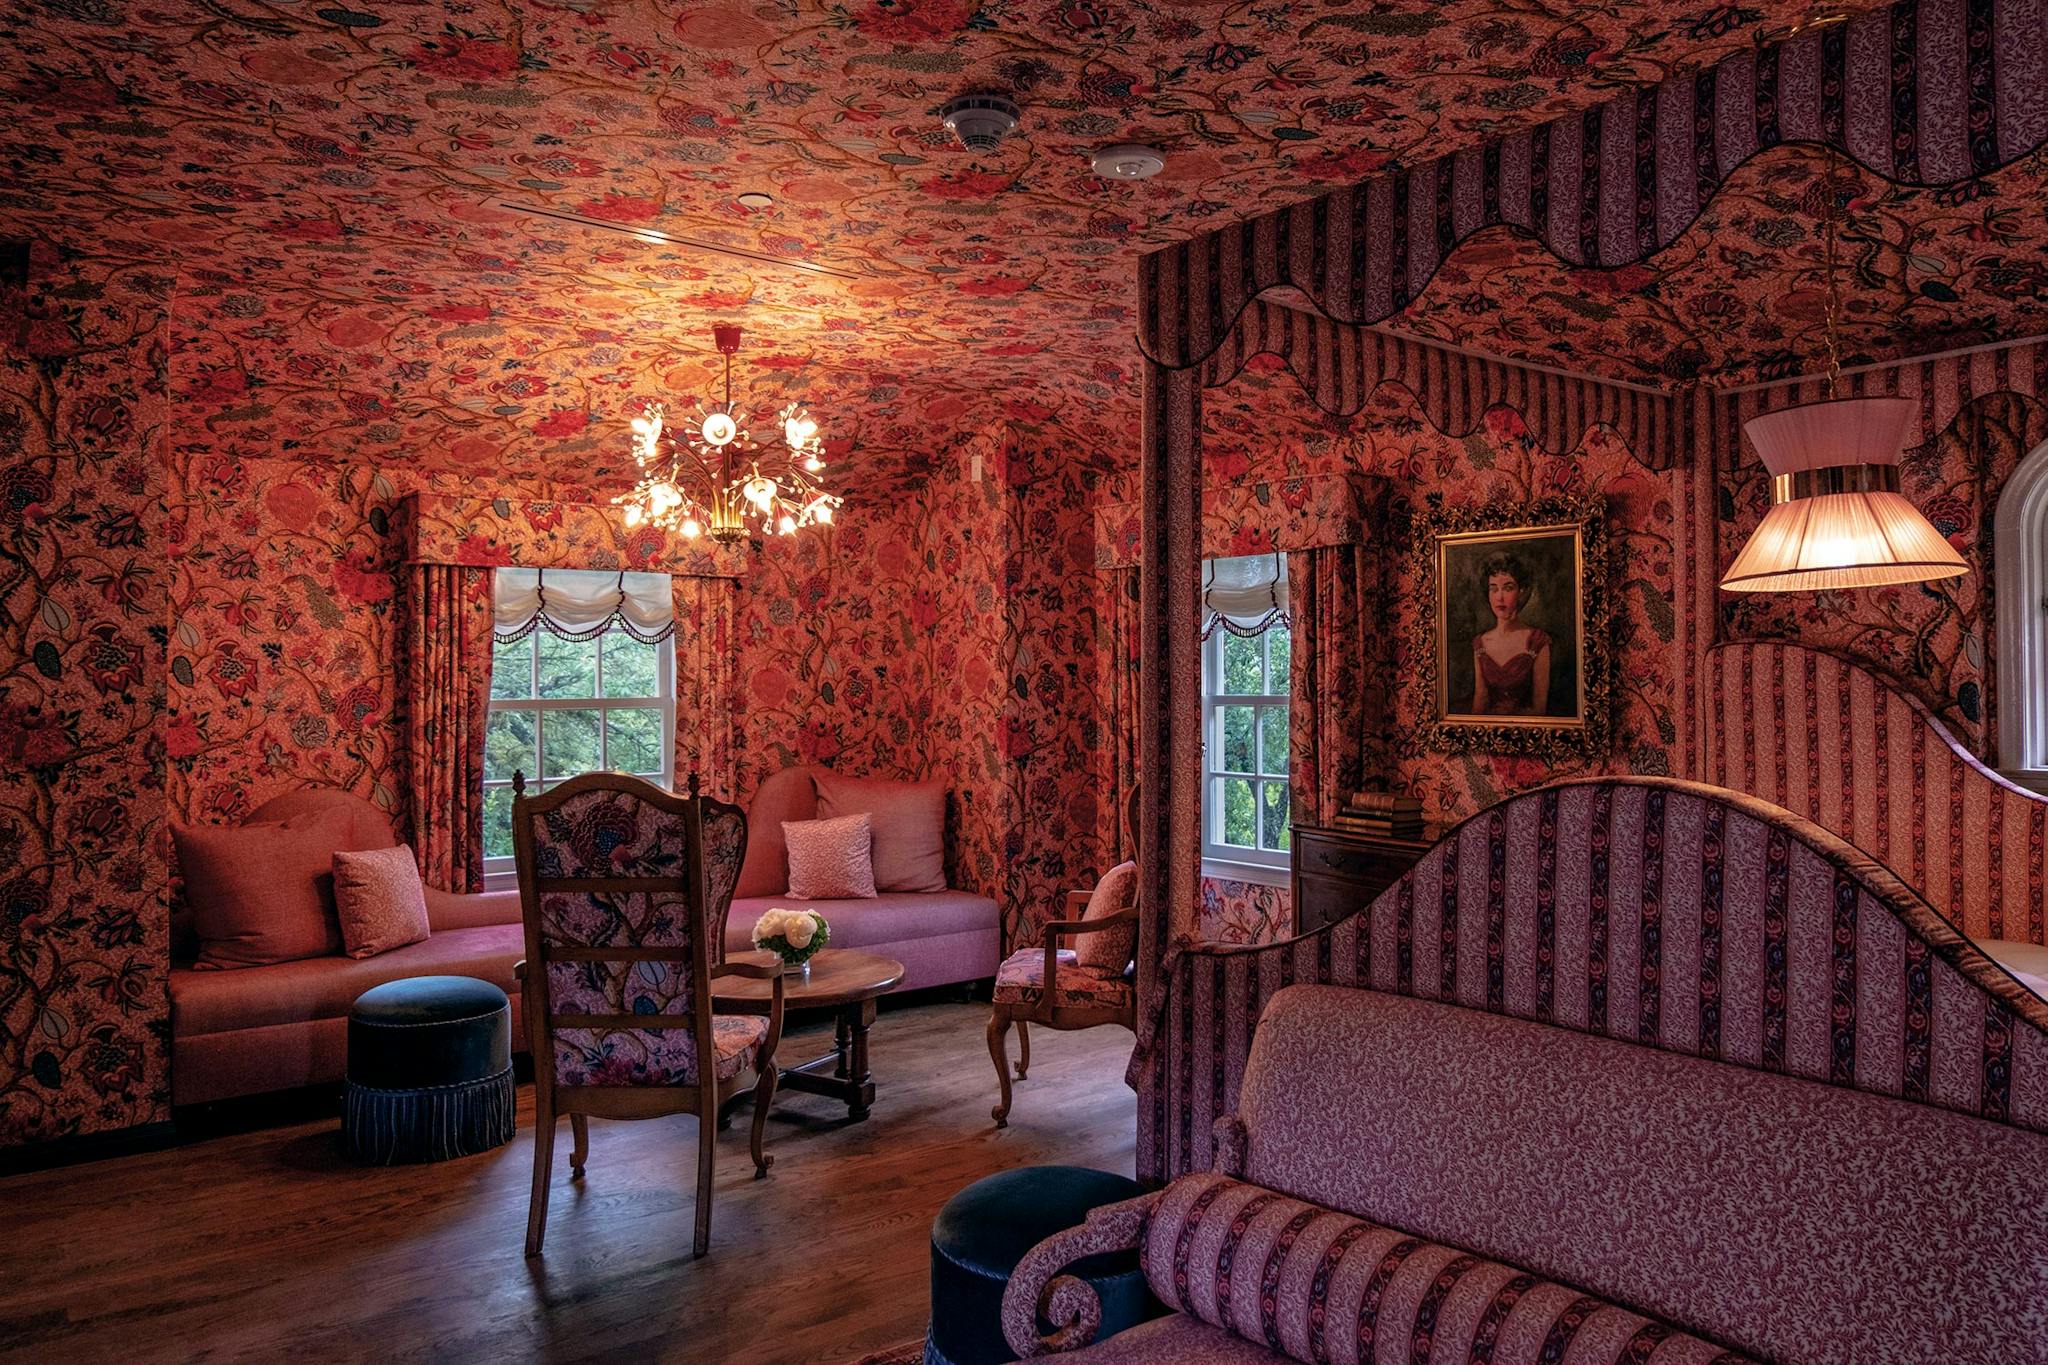 Guest room inside of the Commodore Perry mansion with floral wall paper on the walls and ceiling.